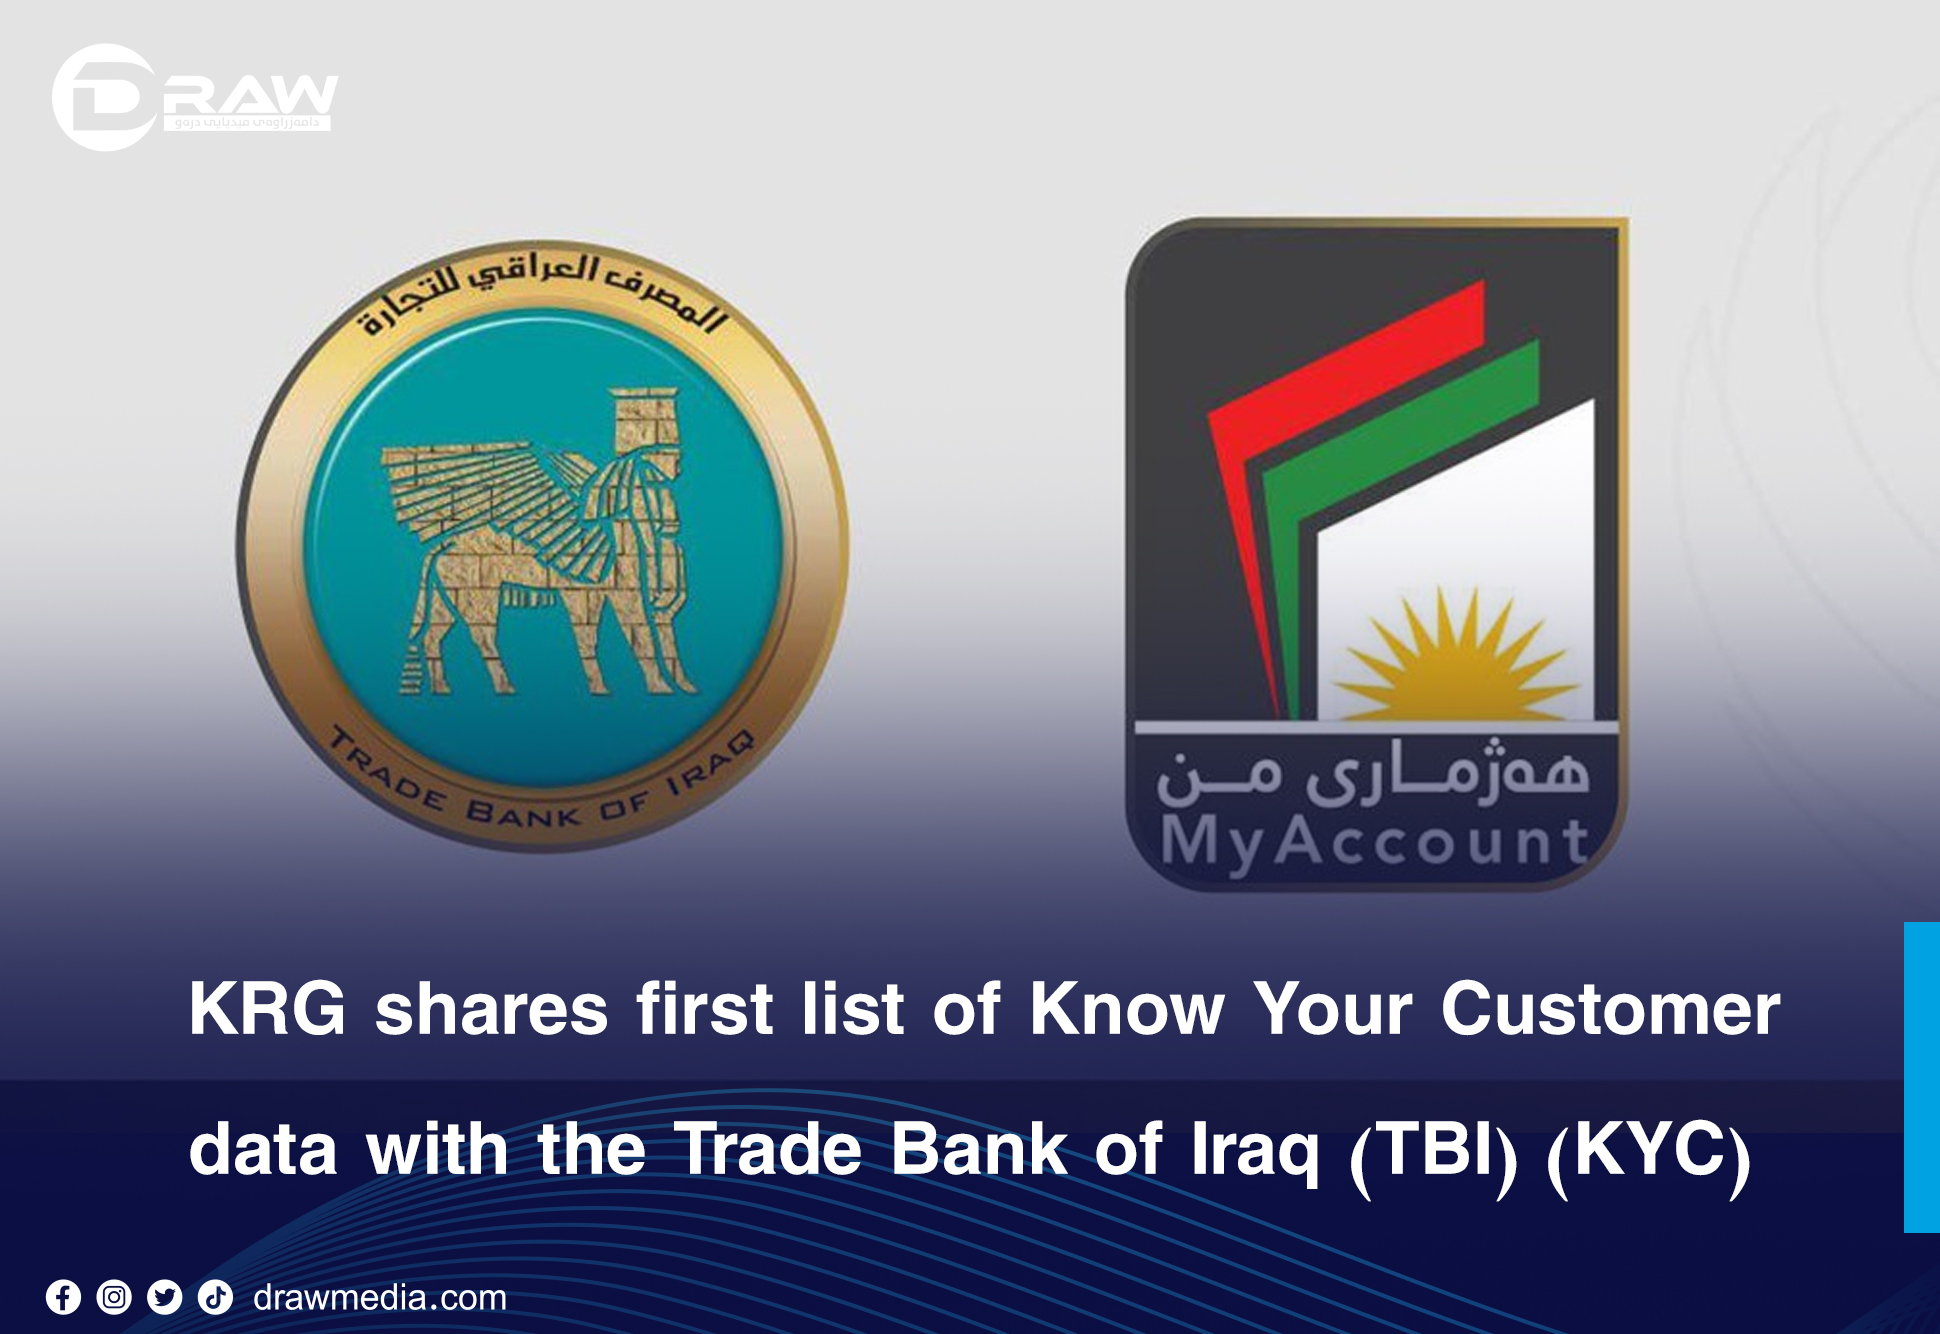 Draw Media- KRG shares first list of Know Your Customer (KYC) data with the Trade Bank of Iraq (TBI)